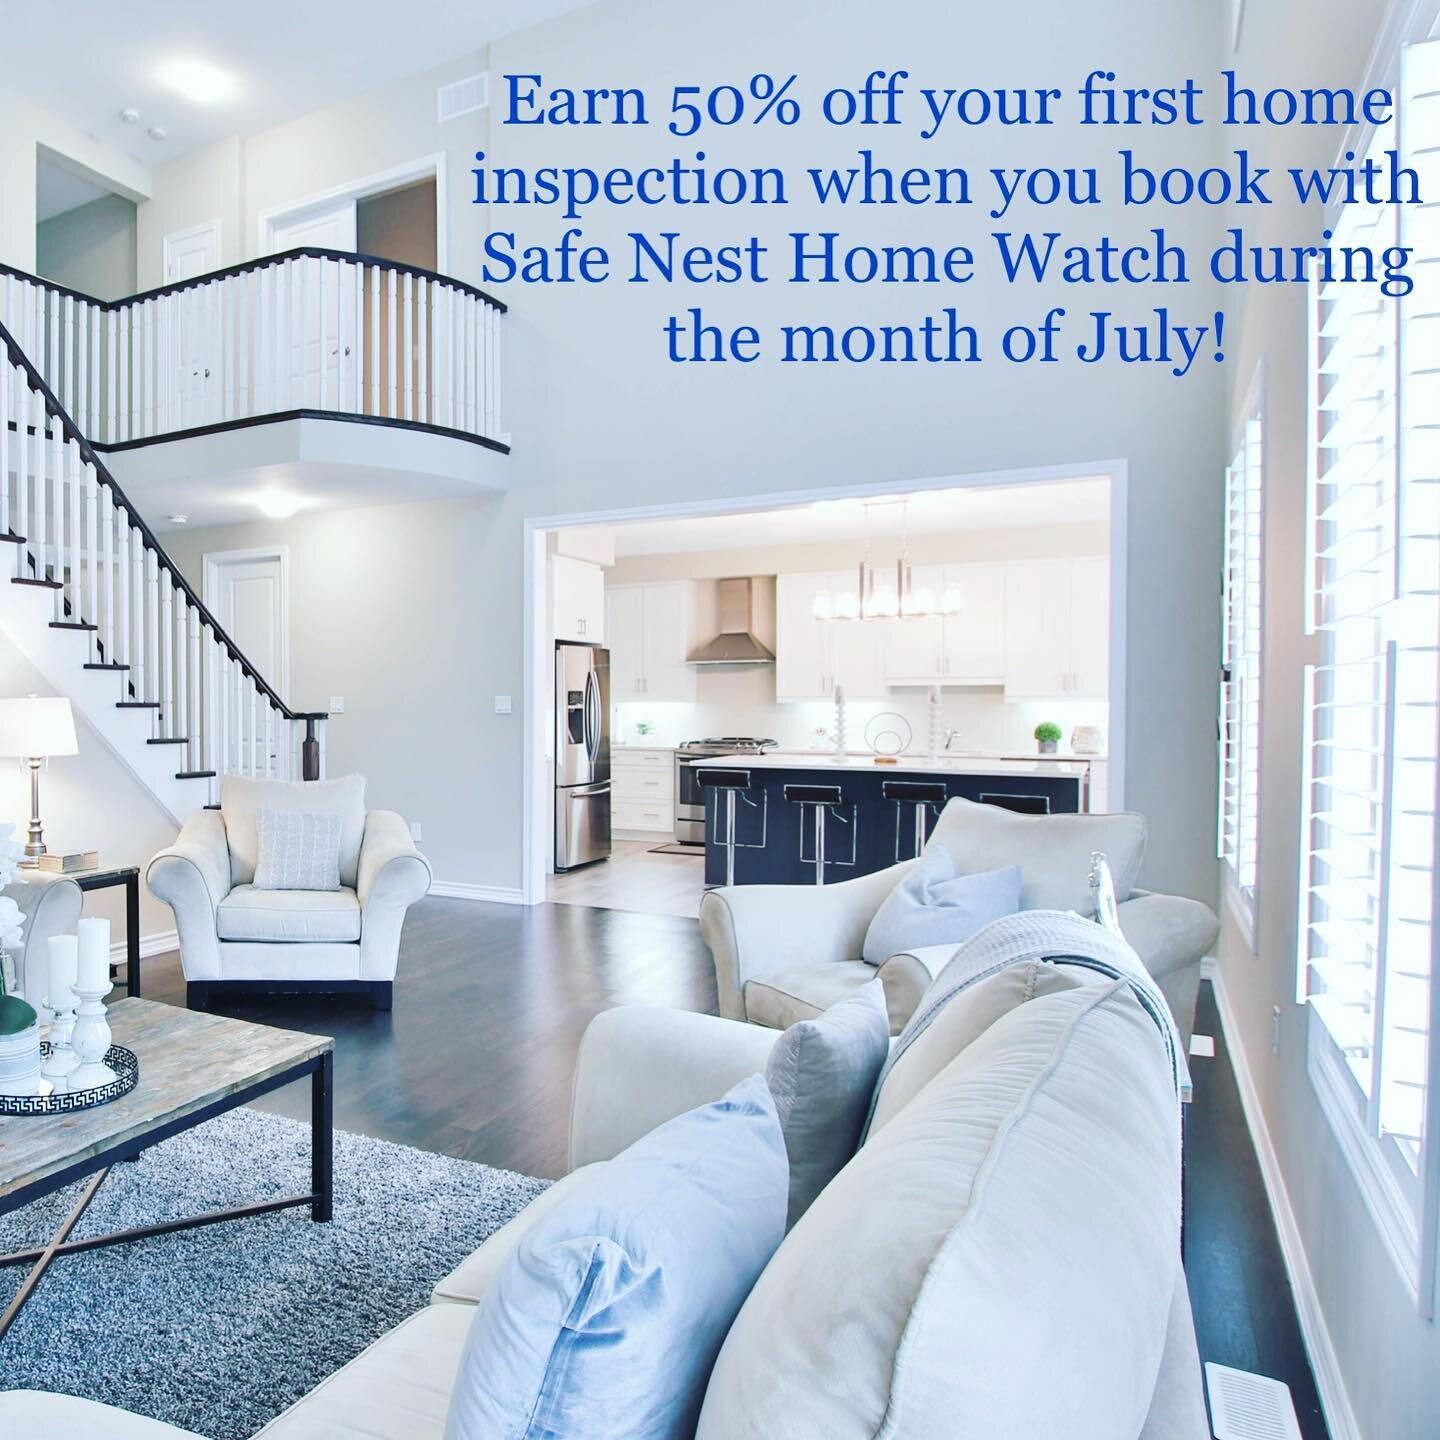 Special summer offer! You can now earn 50% off your first home inspection when you book with Safe Nest Home Watch during the month of July! #homewatch #homewatchprofessionals #lakewoodranch #lakewoodranchfl #conciergeservices